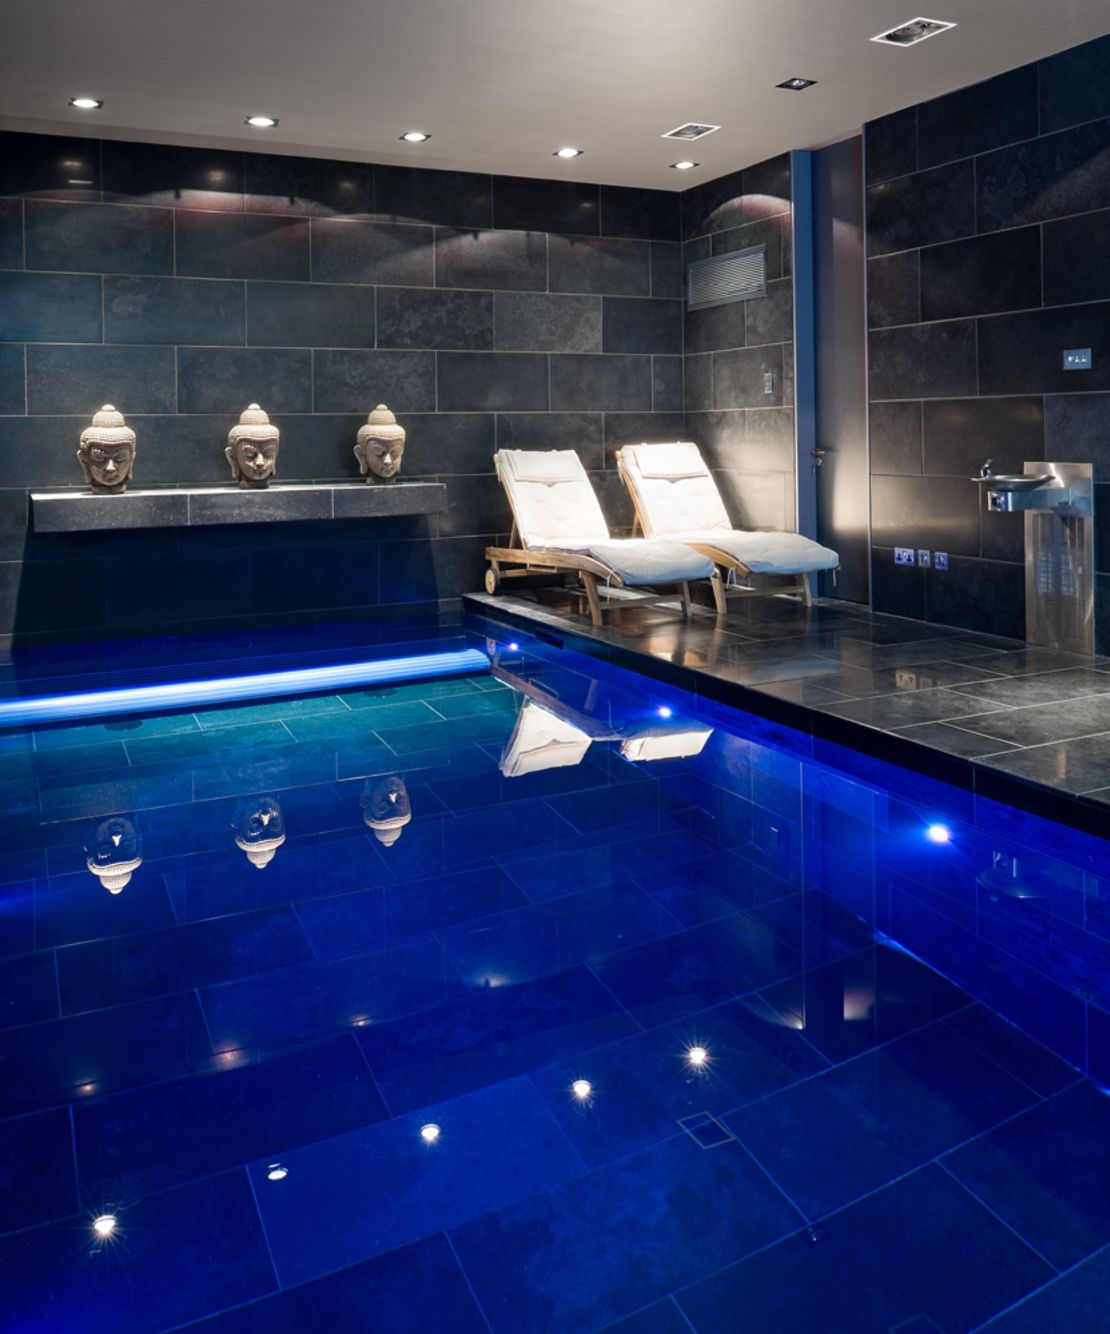 A swimming pool installed in a basement in London.